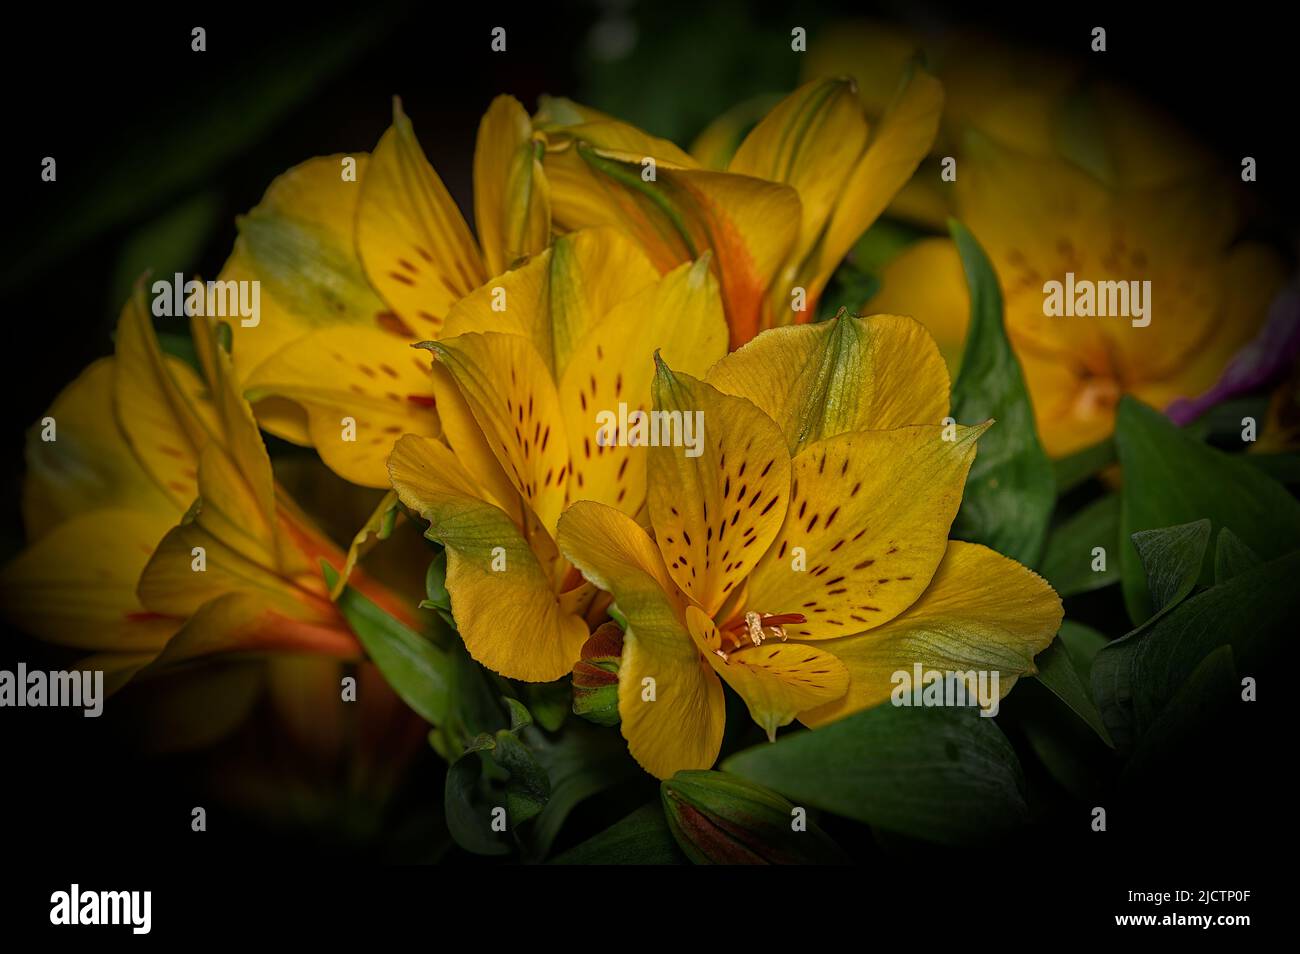 Alstroemeria an indoor or out door flower with bright coloured flower heads. Growing in a North Norfolk garden, UK Stock Photo